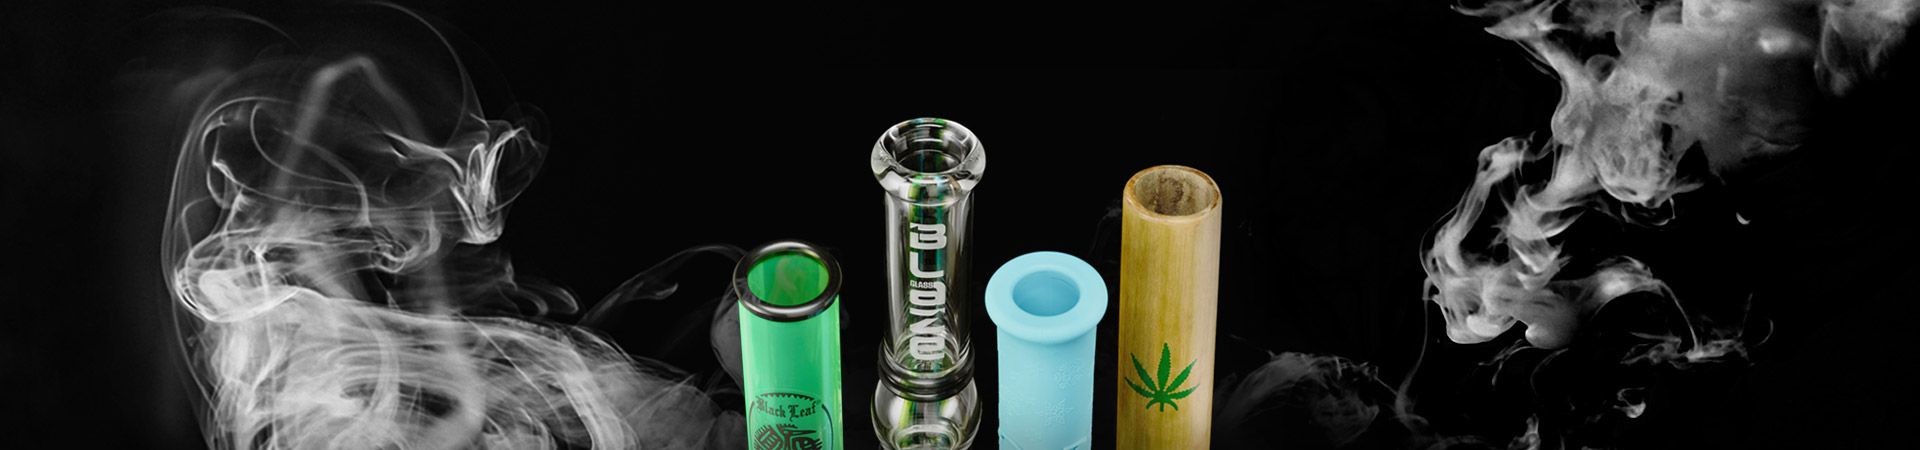 Bong as ‘Works of Art’ in all kinds of materials